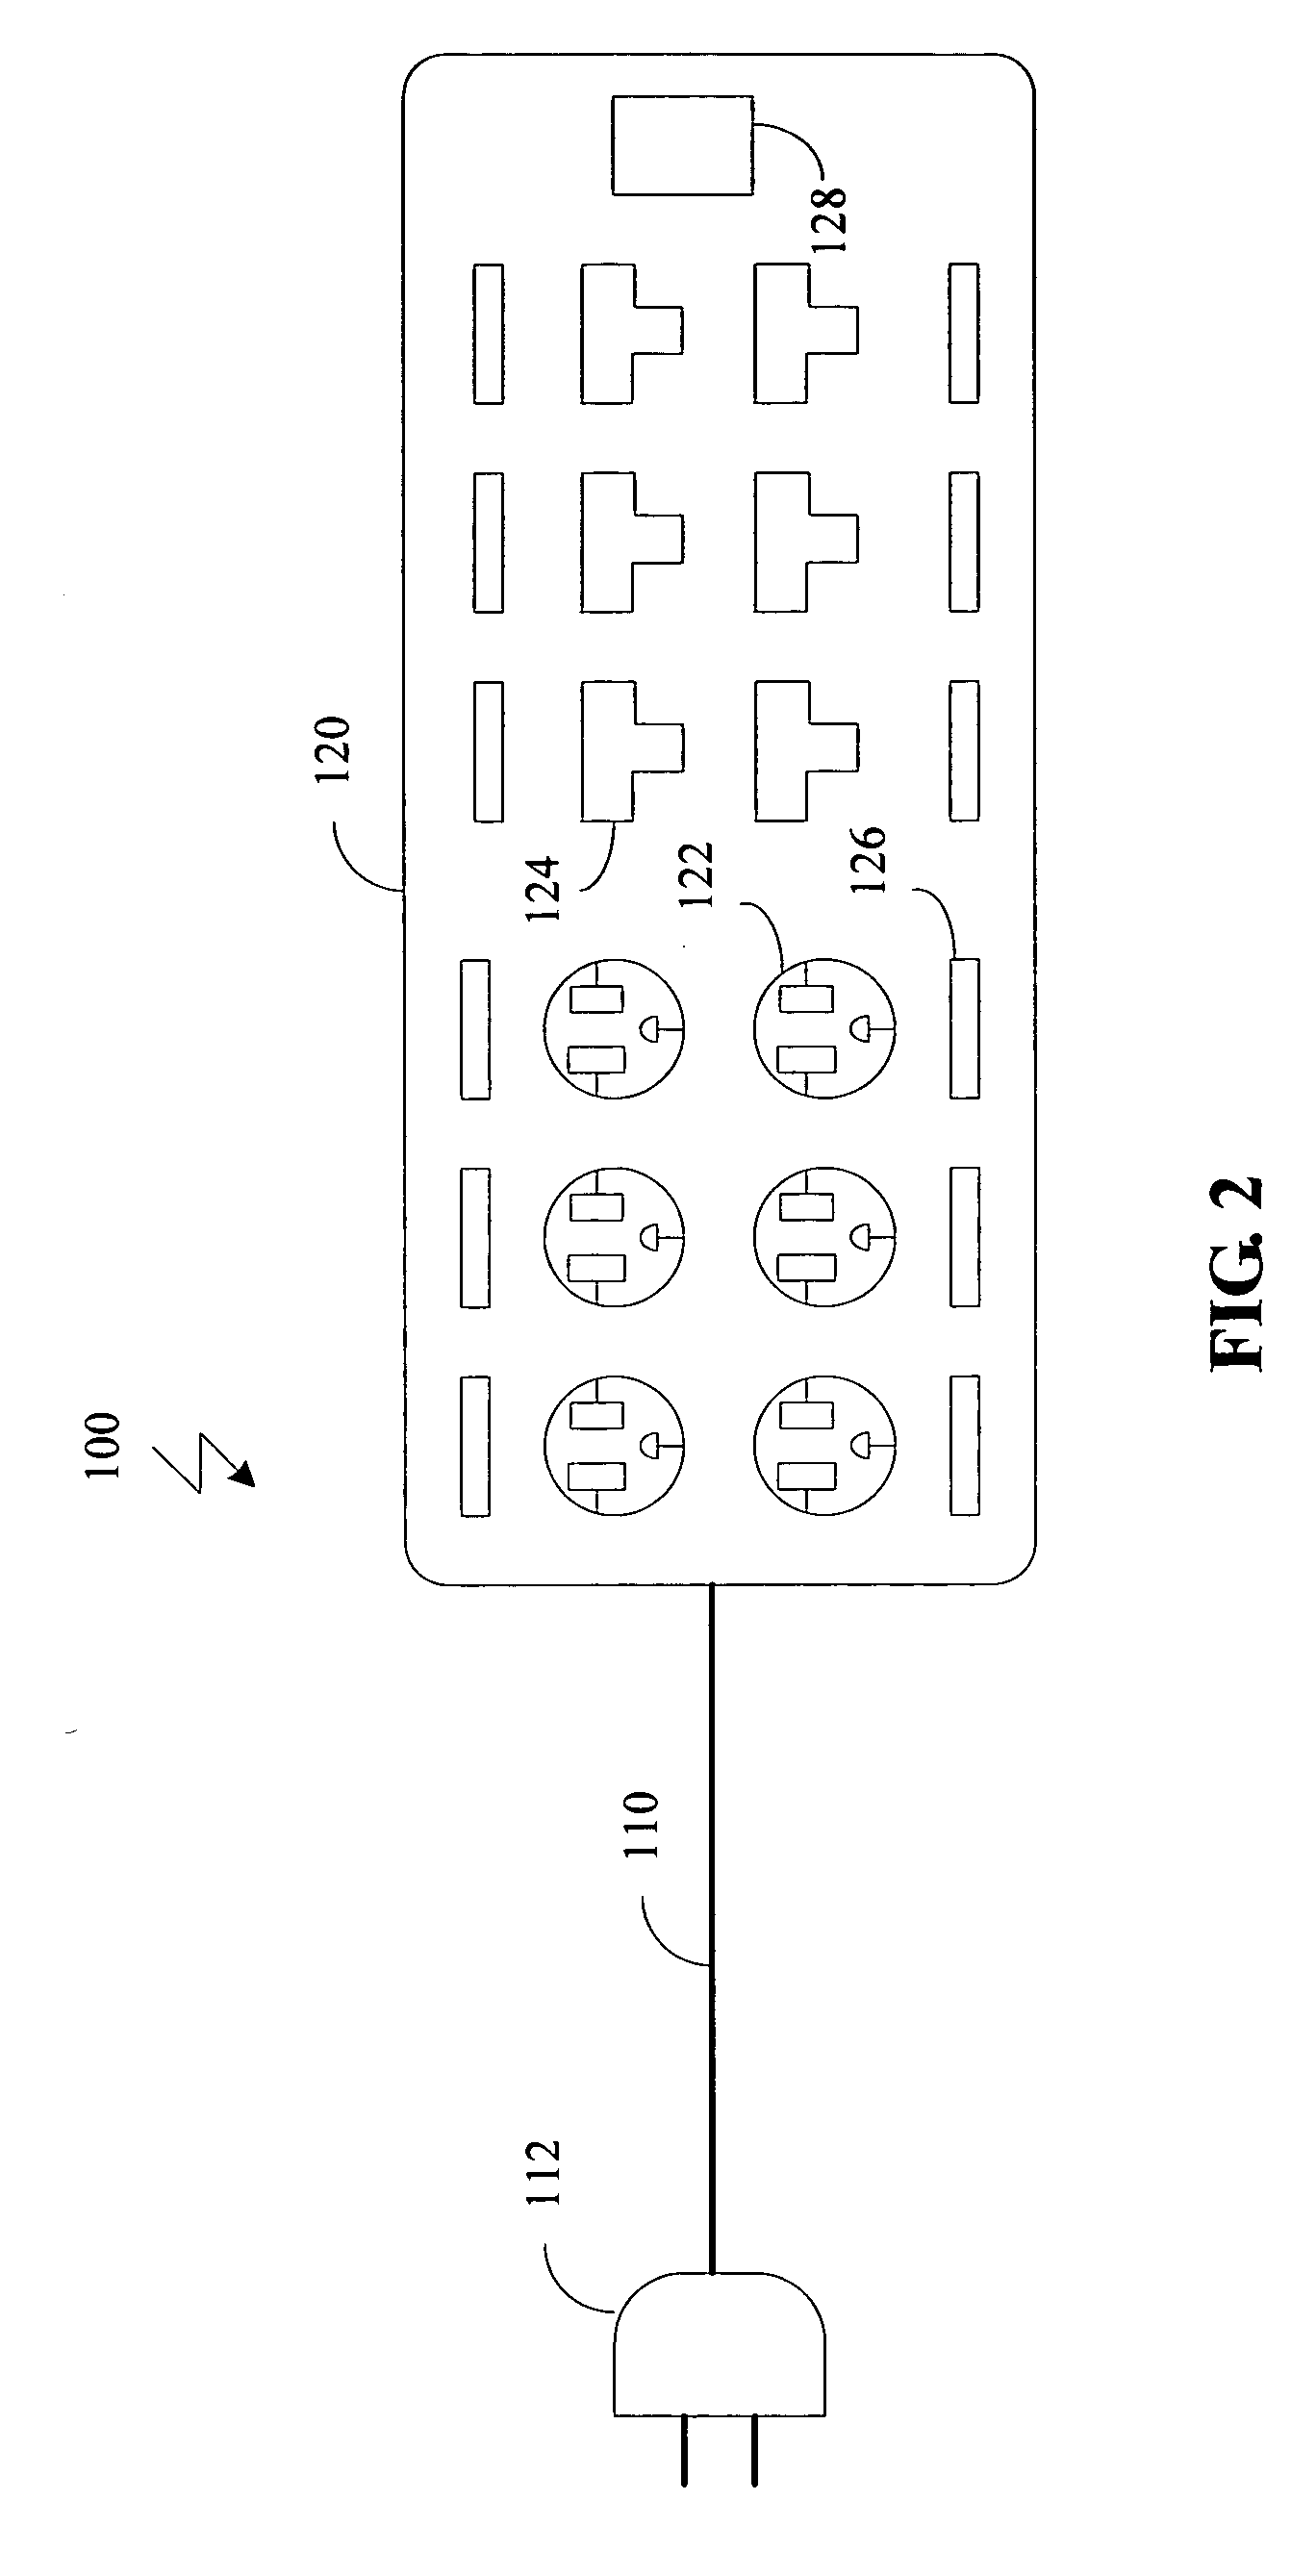 Power extension apparatus having local area network switching function